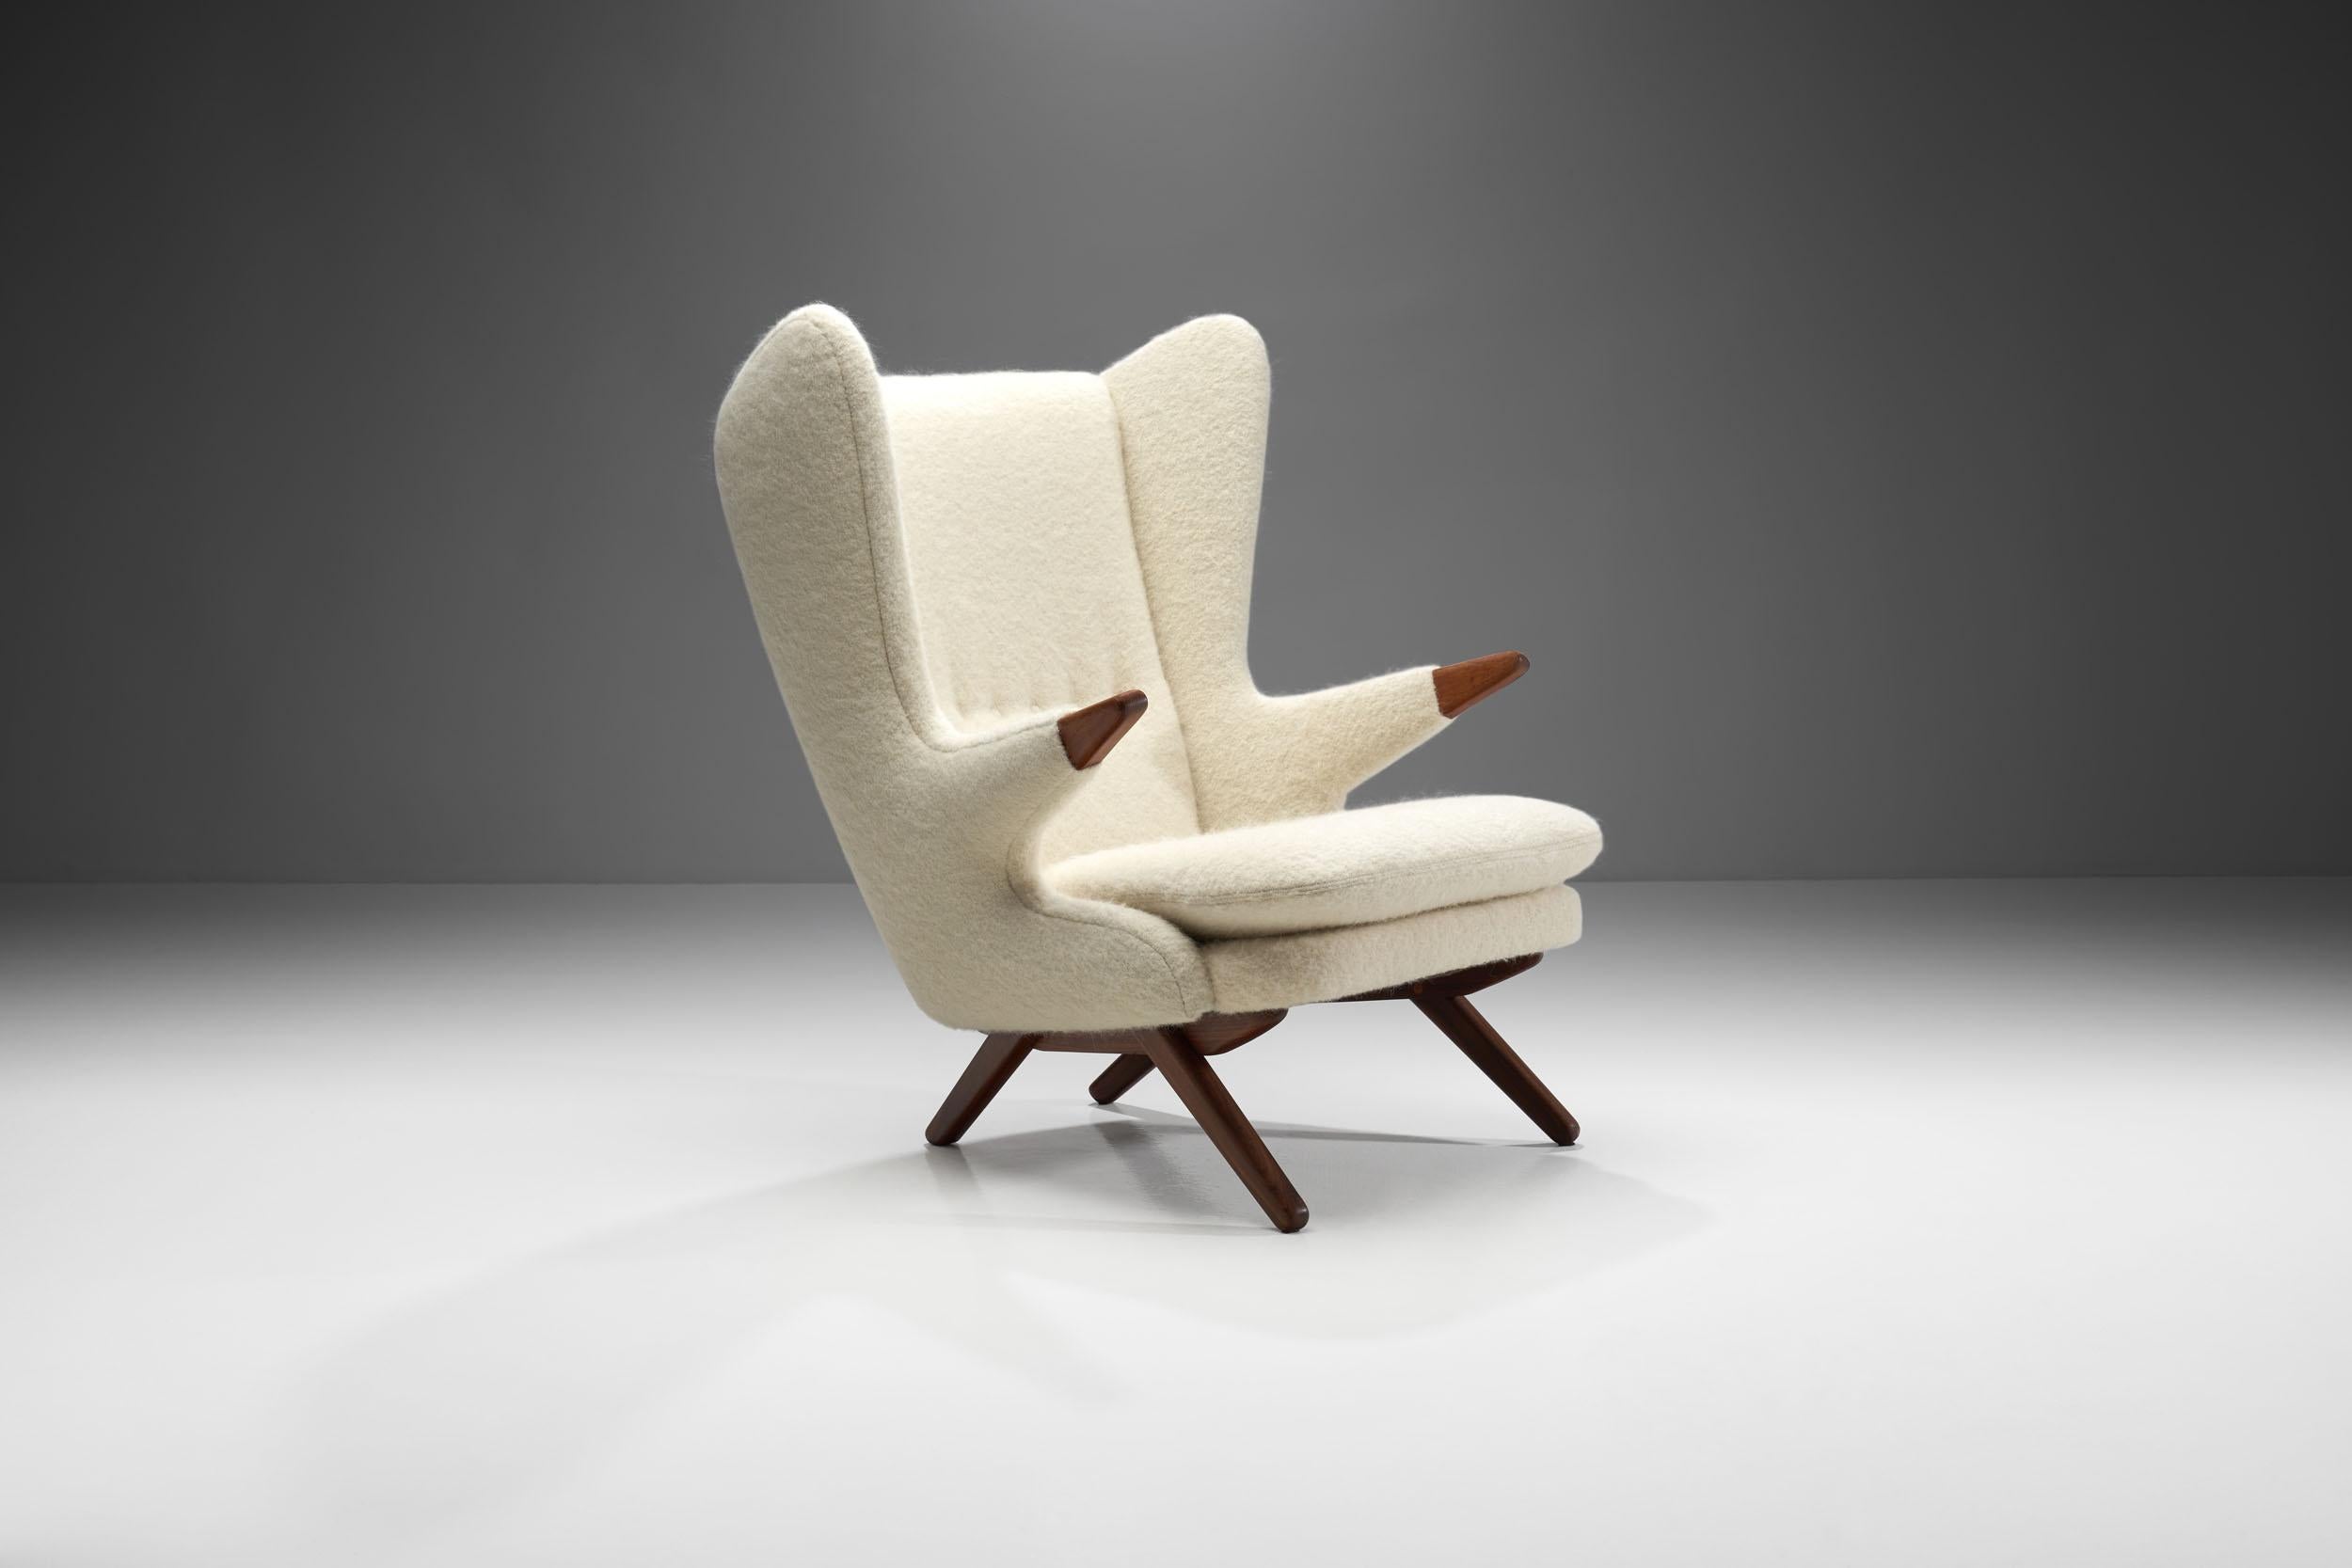 This chair is the most recognisable model of Danish designer and manufacturer, Sven Skipper and a great example of the mid-century design era. Skipper only created commissioned pieces, meaning none of his designs were mass produced. 

“Model 91”